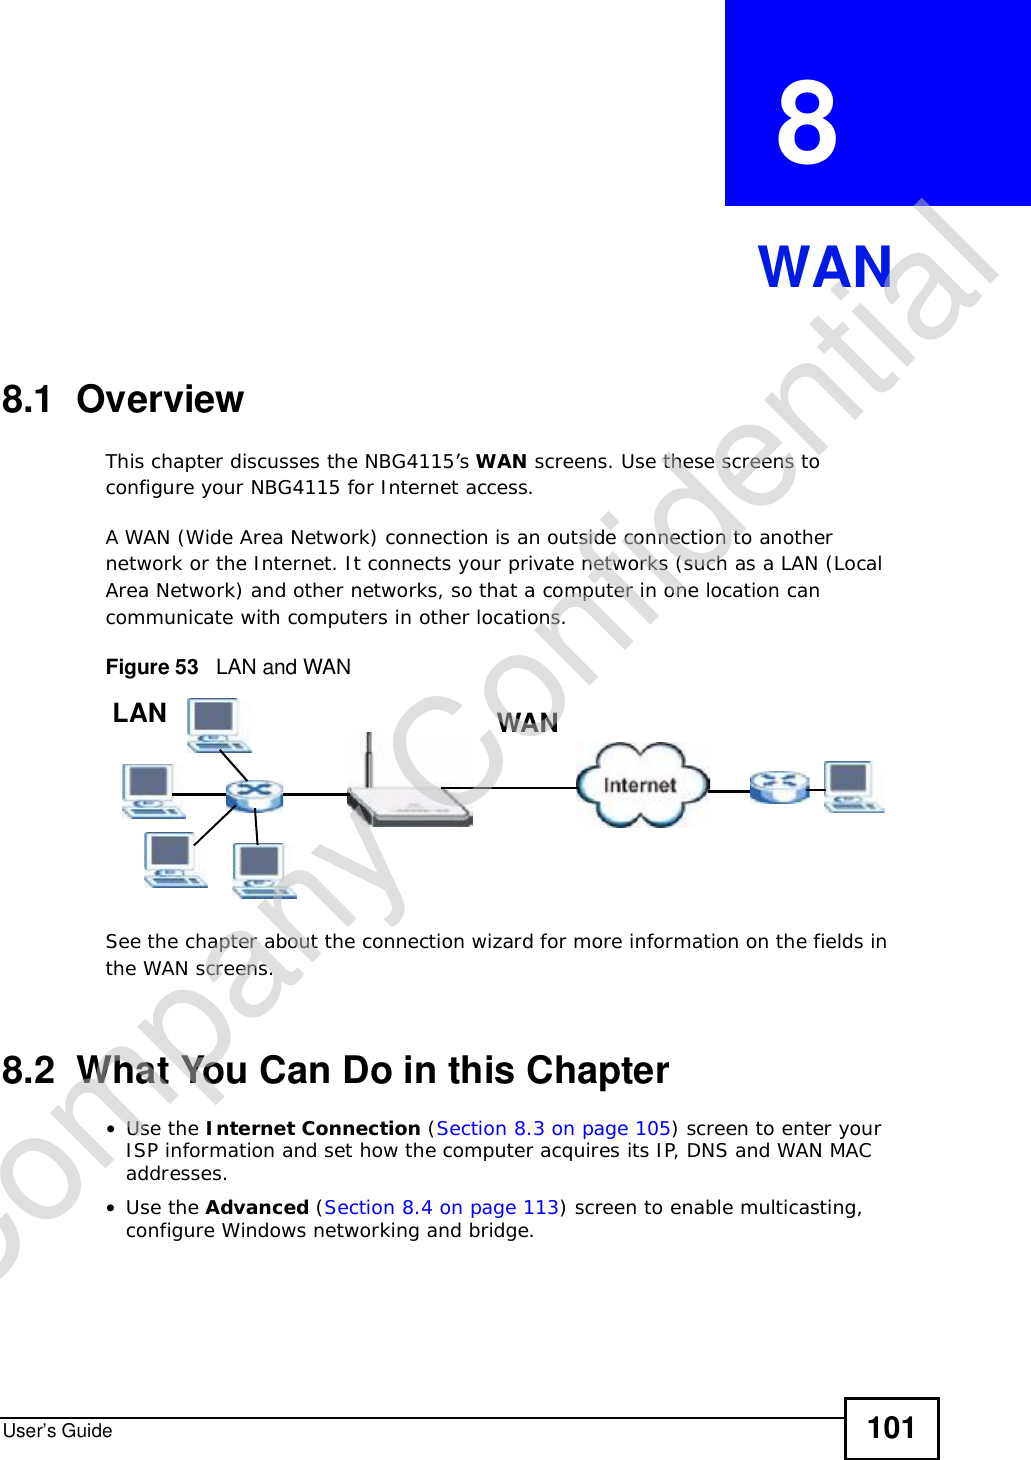 User’s Guide 101CHAPTER  8 WAN8.1  OverviewThis chapter discusses the NBG4115’s WAN screens. Use these screens to configure your NBG4115 for Internet access.A WAN (Wide Area Network) connection is an outside connection to another network or the Internet. It connects your private networks (such as a LAN (Local Area Network) and other networks, so that a computer in one location can communicate with computers in other locations.Figure 53   LAN and WANSee the chapter about the connection wizard for more information on the fields in the WAN screens.8.2  What You Can Do in this Chapter•Use the Internet Connection (Section 8.3 on page 105) screen to enter your ISP information and set how the computer acquires its IP, DNS and WAN MAC addresses.•Use the Advanced (Section 8.4 on page 113) screen to enable multicasting, configure Windows networking and bridge.WANLANCompany Confidential